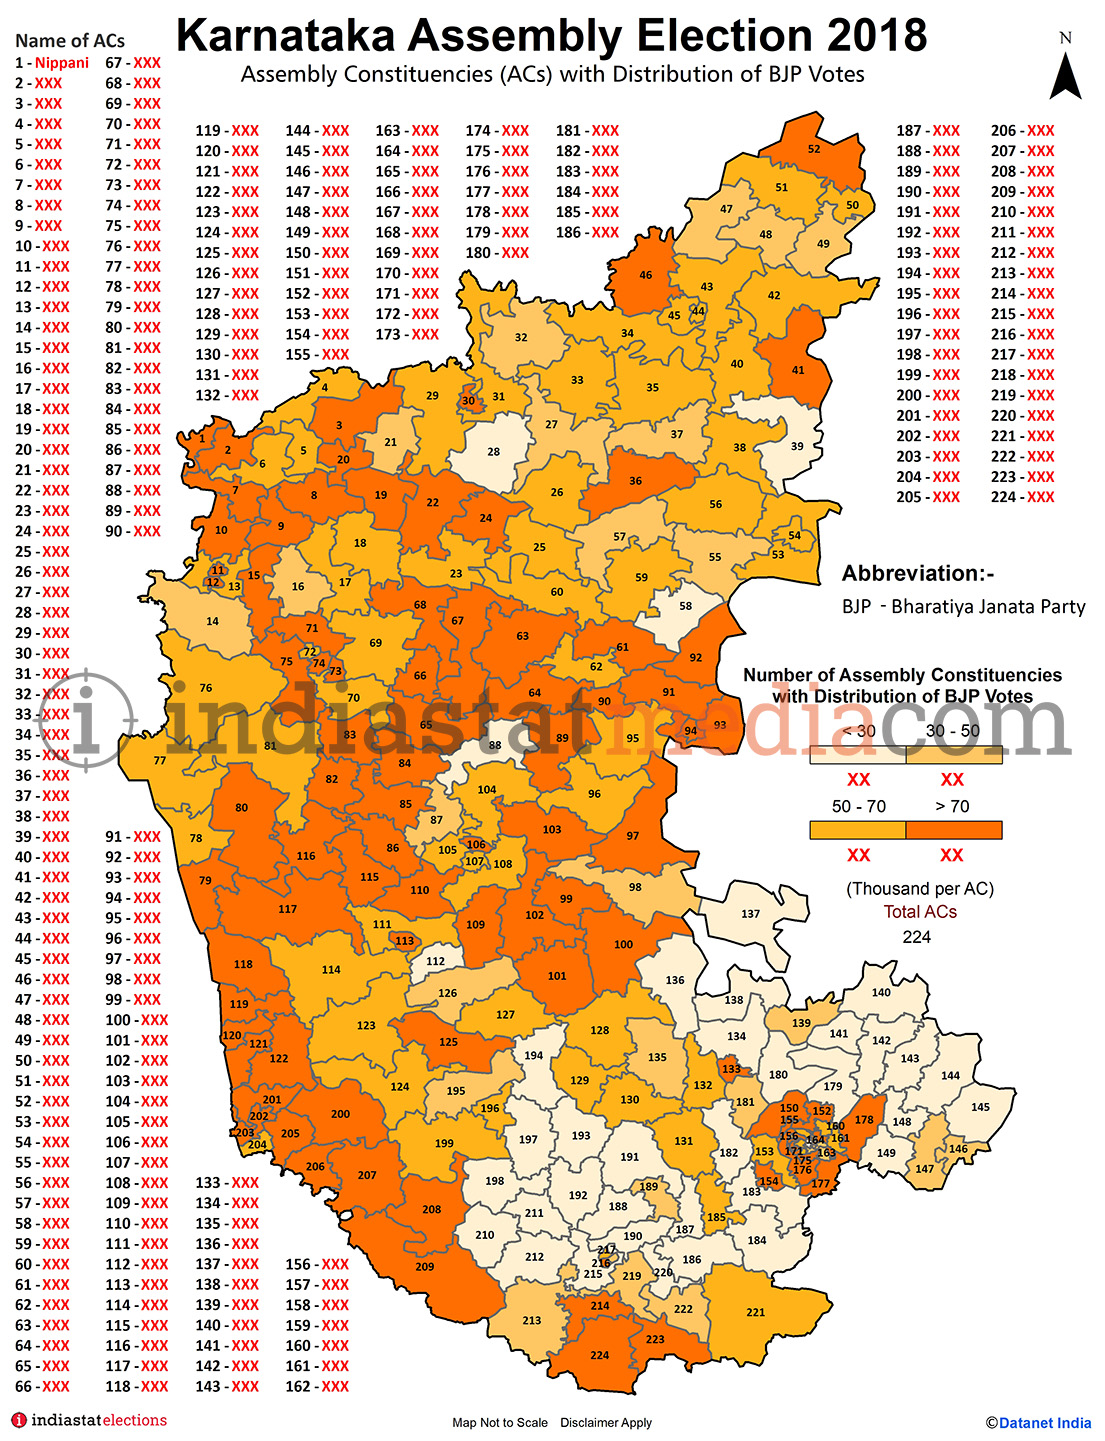 Distribution of BJP Votes by Constituencies in Karnataka (Assembly Election - 2018)